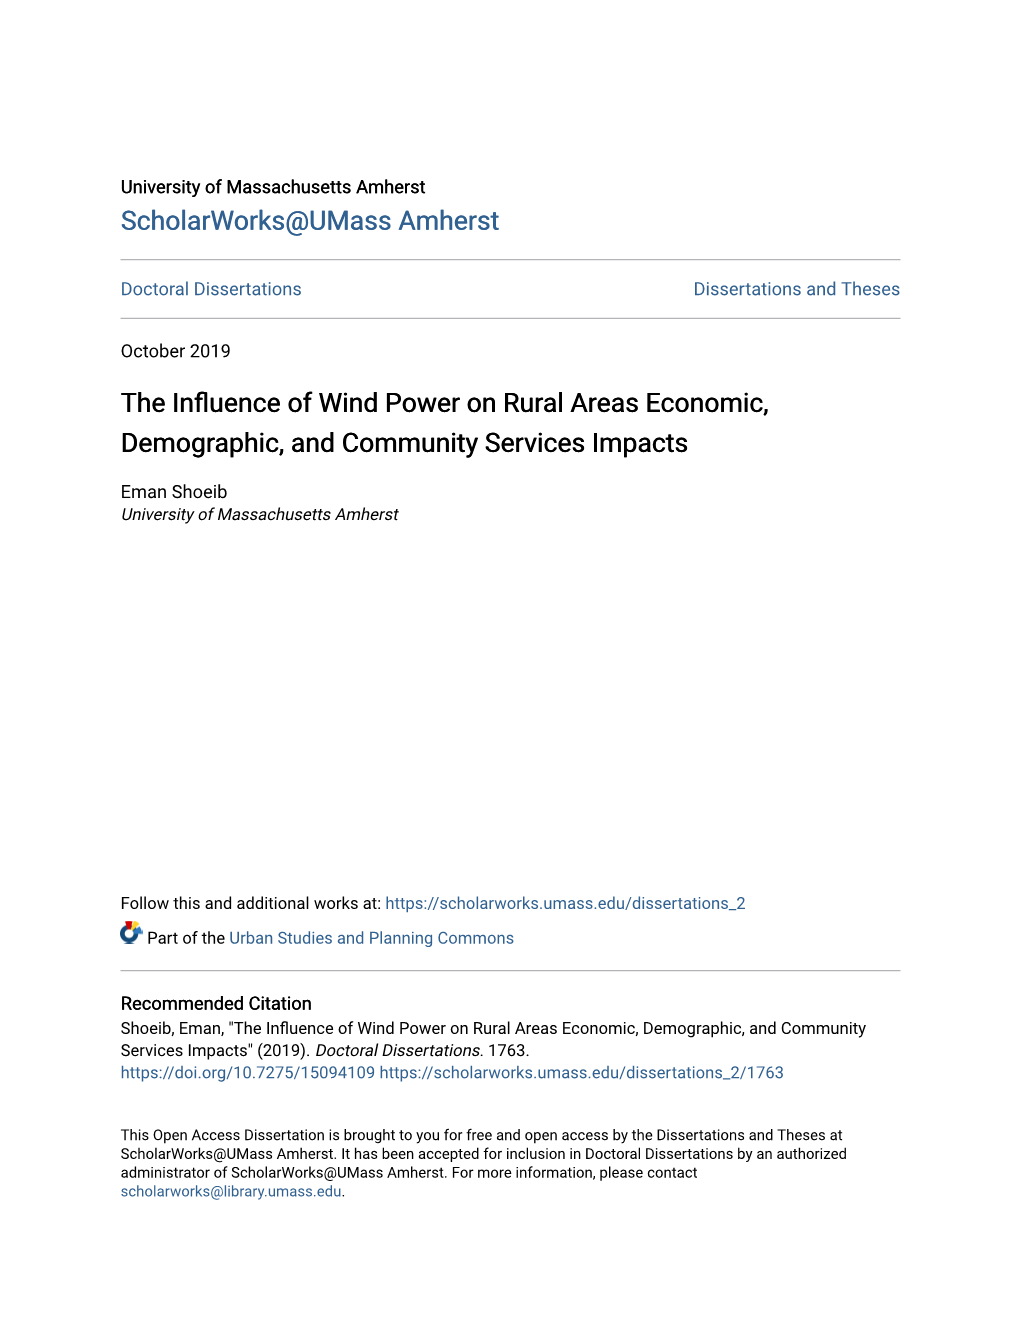 The Influence of Wind Power on Rural Areas Economic, Demographic, and Community Services Impacts